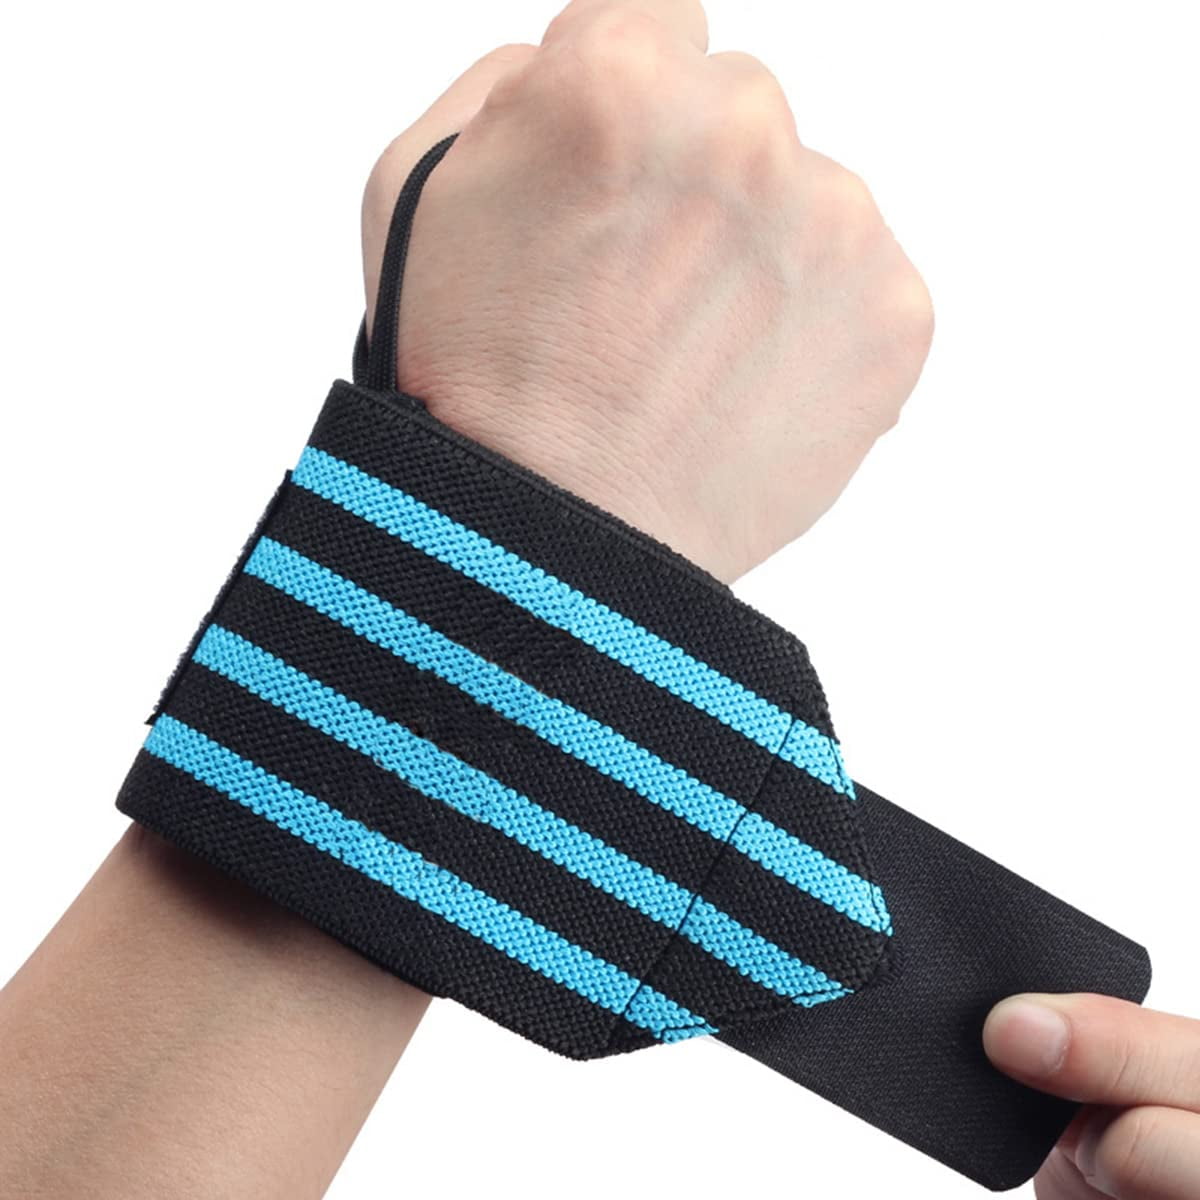 kossto Wrist Support Brace, Wrist Strap, Sport Wrist Wrap Gym Accessories for Hand Grip, Weightlifting for Wrist Pain Relief with Thumb Loop Straps